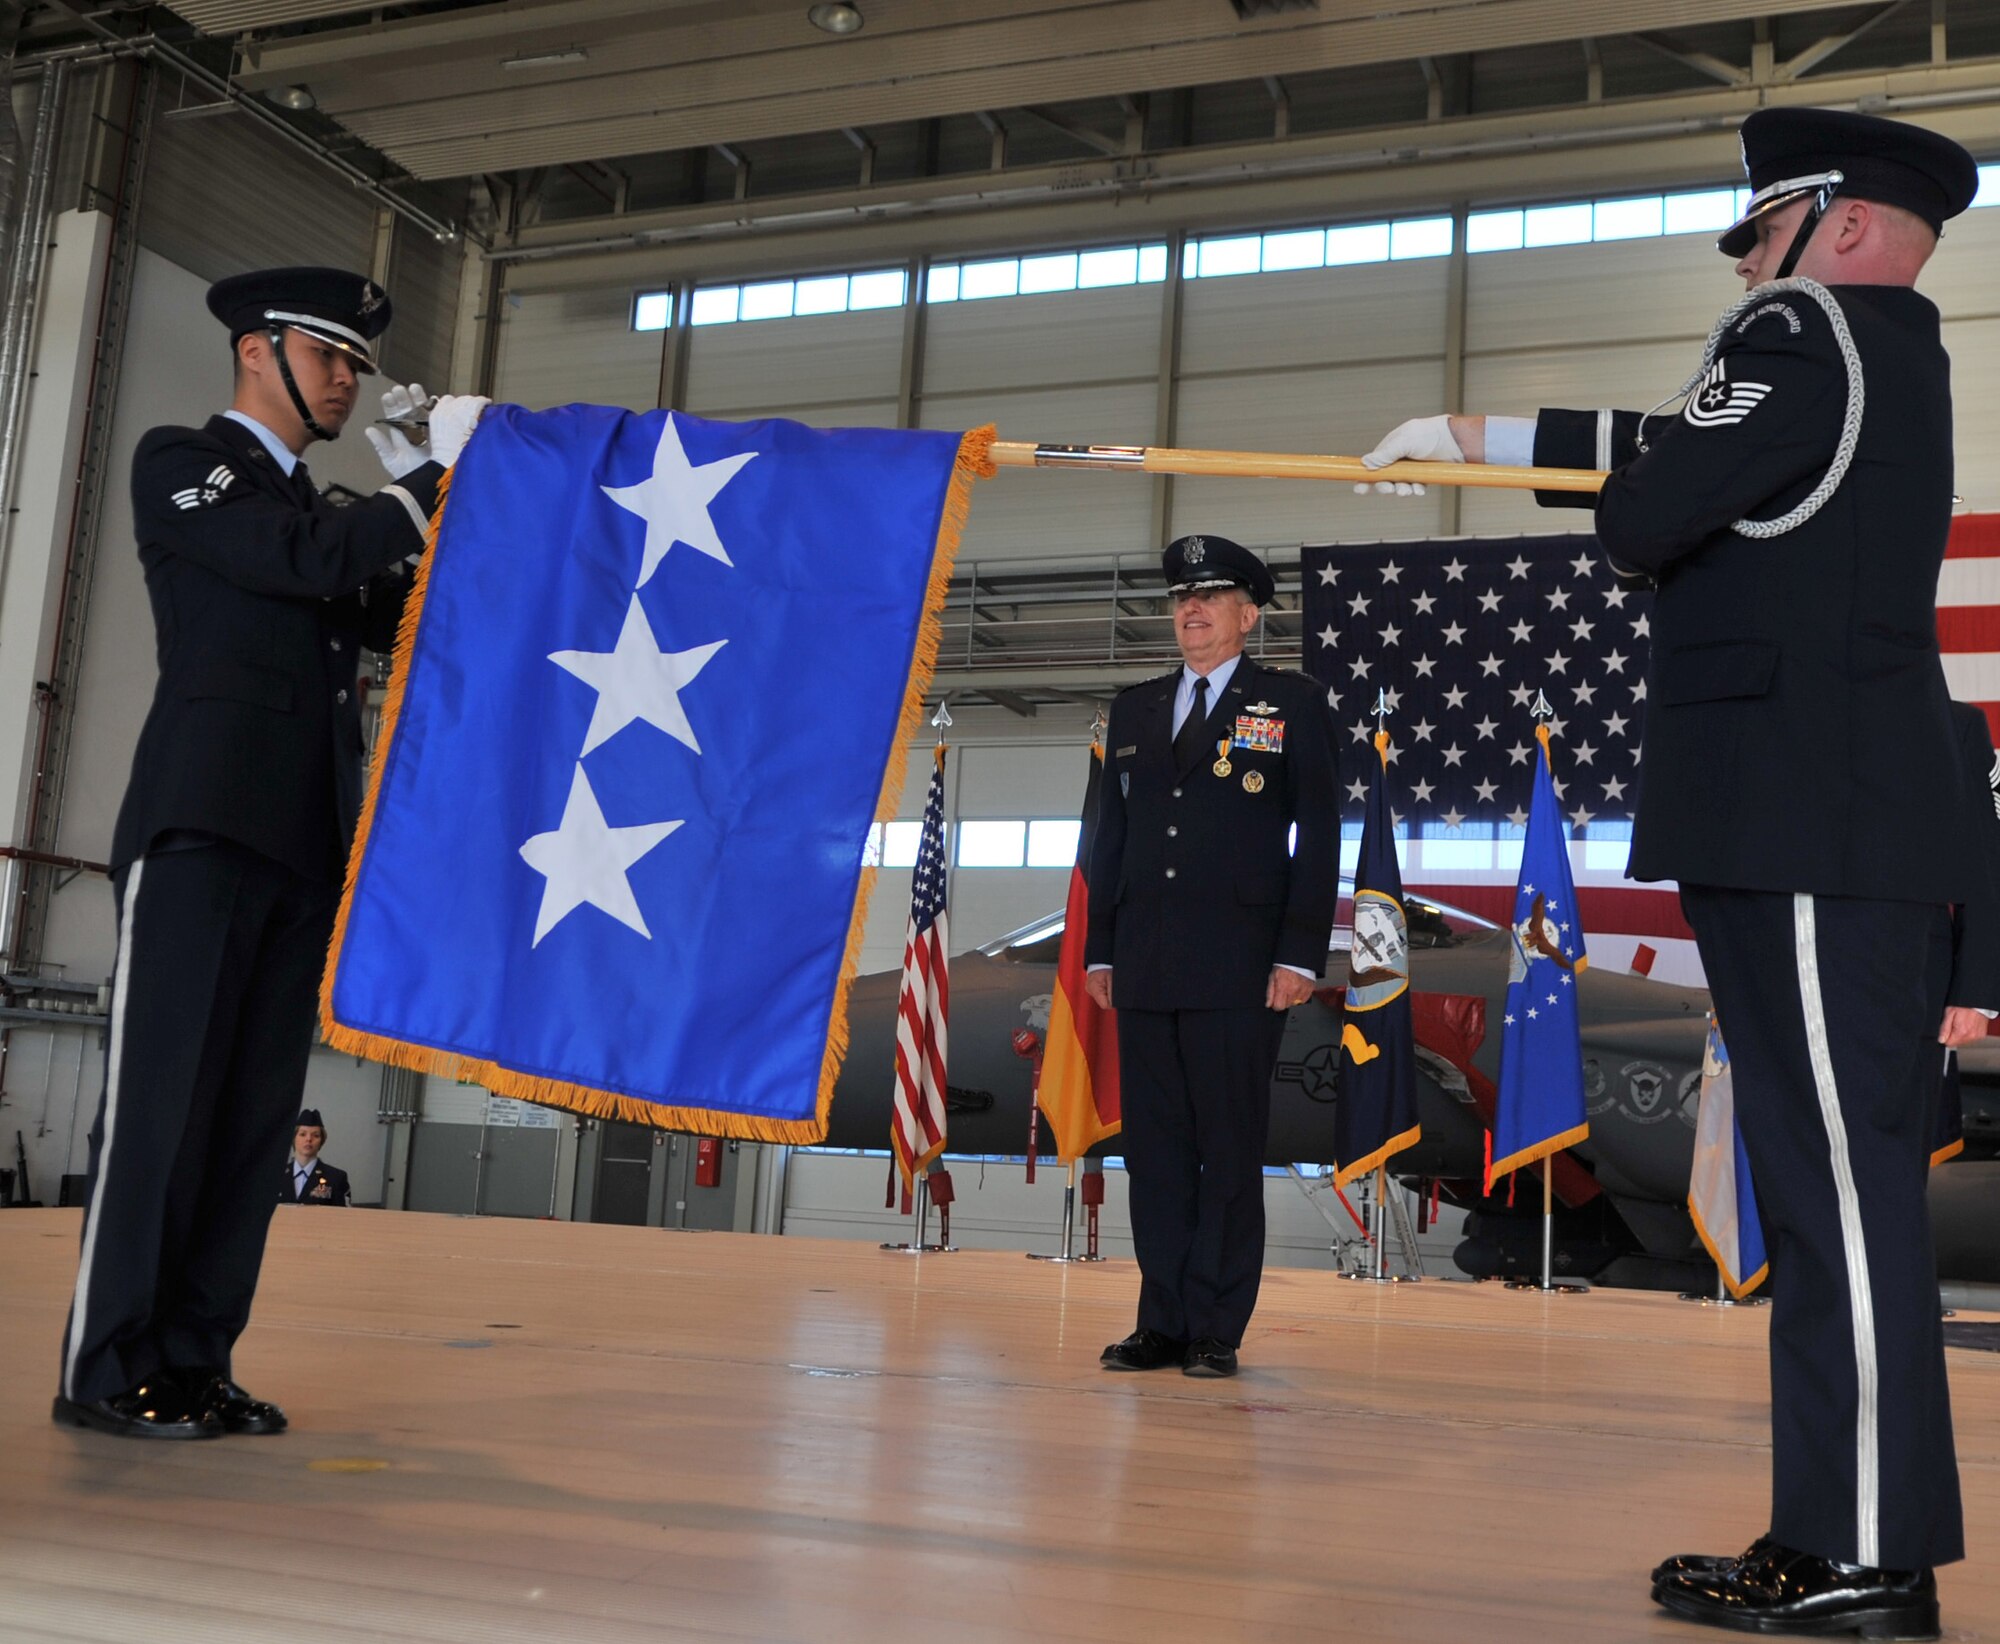 U.S. Air Force Gen. Roger A. Brady watches his flag furl during his retirement ceremony after relinquishing command of U.S. Air Forces in Europe, Ramstein Air Base, Germany, Dec. 13, 2010. Gen. Brady, relinquished command of USAFE during the change of command ceremony after providing command and control for air, space and missile defense for activities in an area of operations covering almost one-fifth of the globe which included 51 countries in Europe, Asia, the Middle East, and the Arctic and Atlantic oceans. (U.S. Air Force photo by Senior Airman Caleb Pierce)